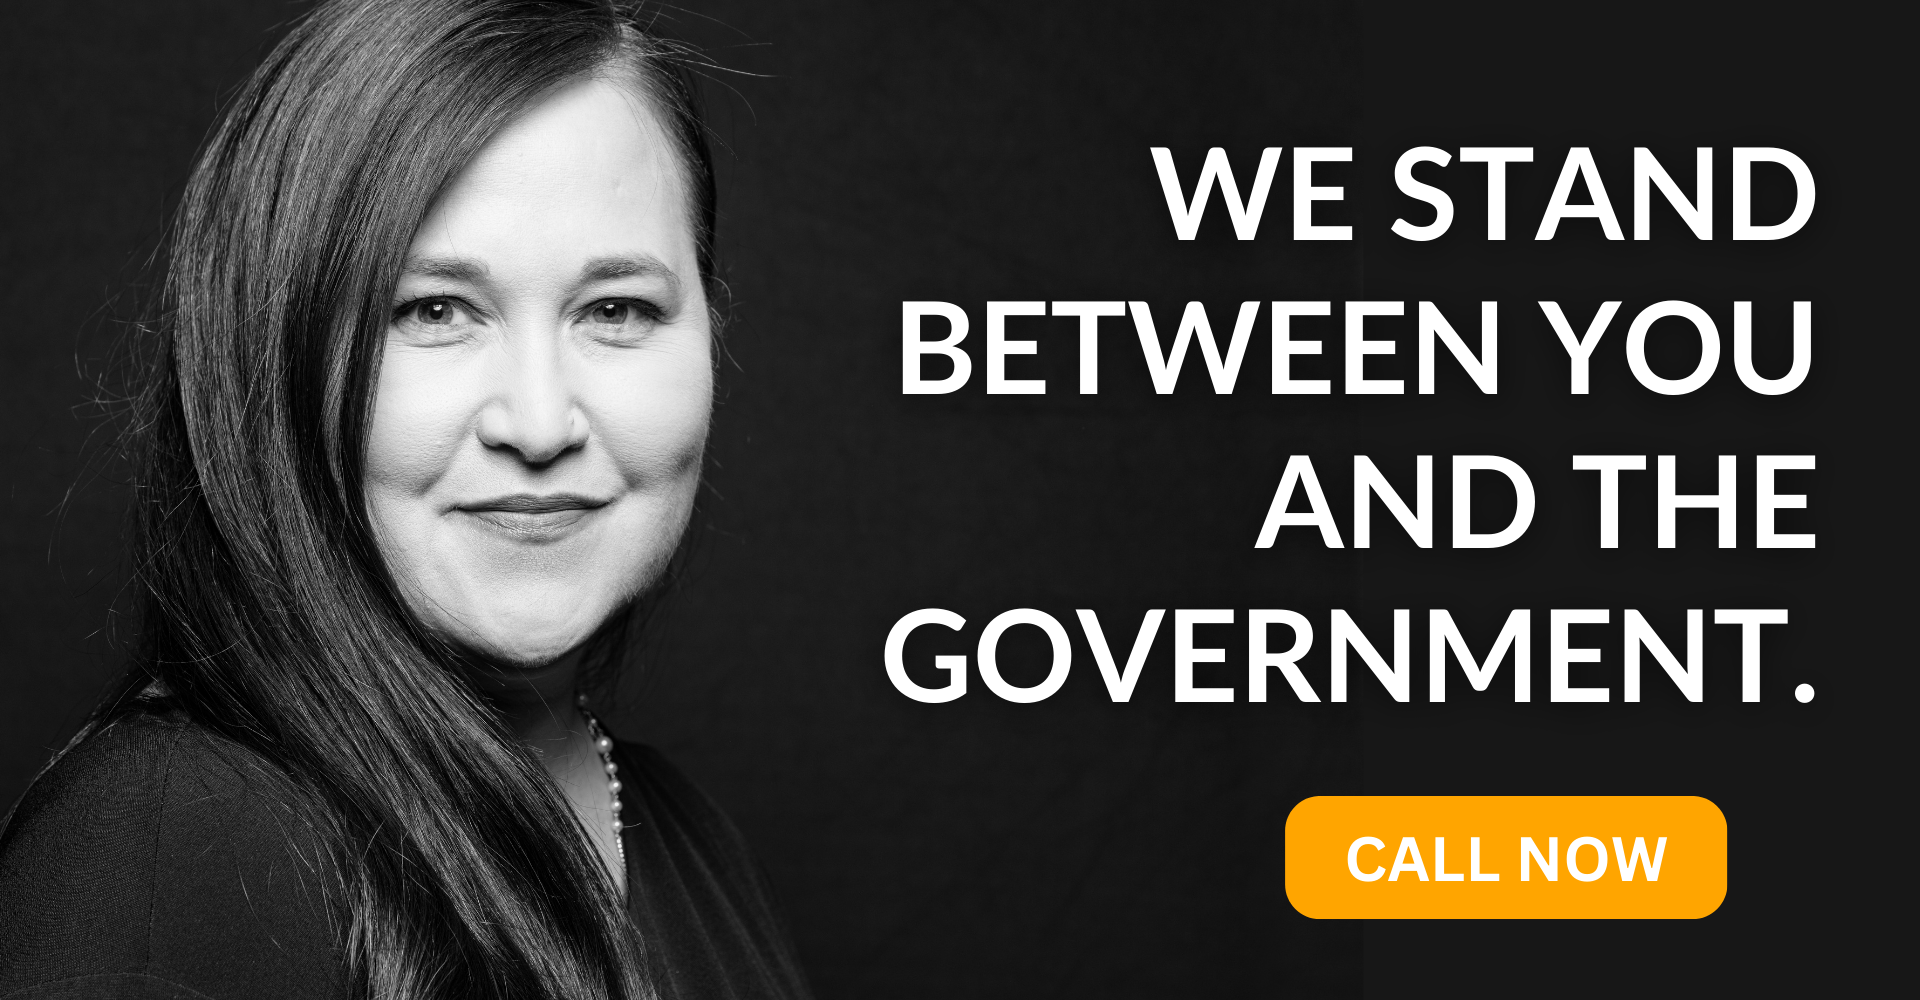 Our criminal defense attorneys stand between you and the government